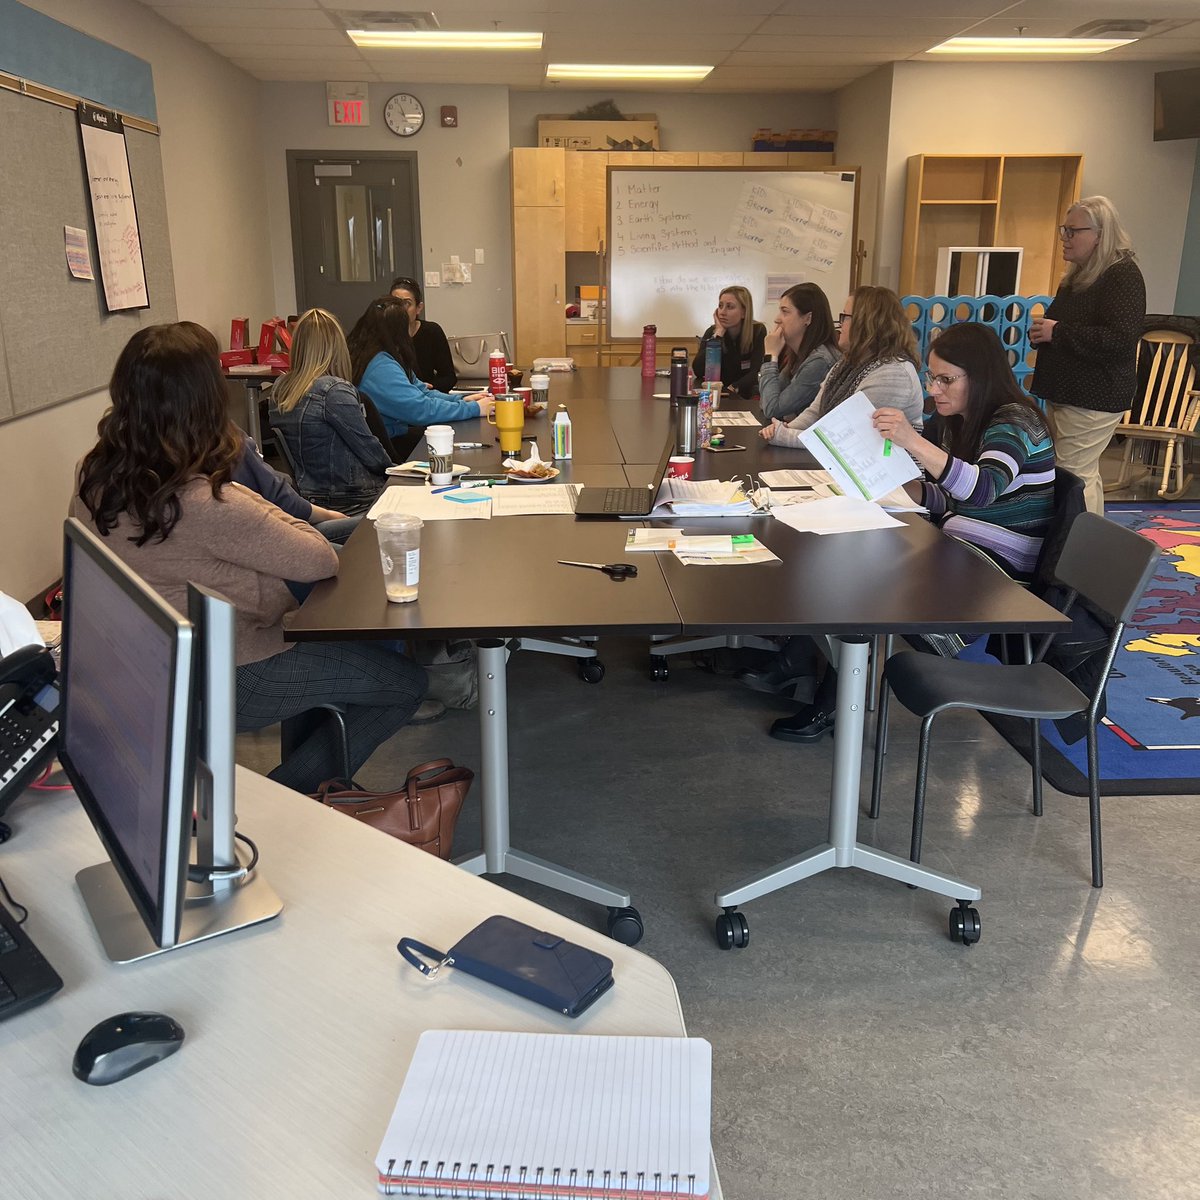 NLPS staff are working on aligning our assessment and reporting practices with the upcoming changes to new curriculum in 2023 -2024 .